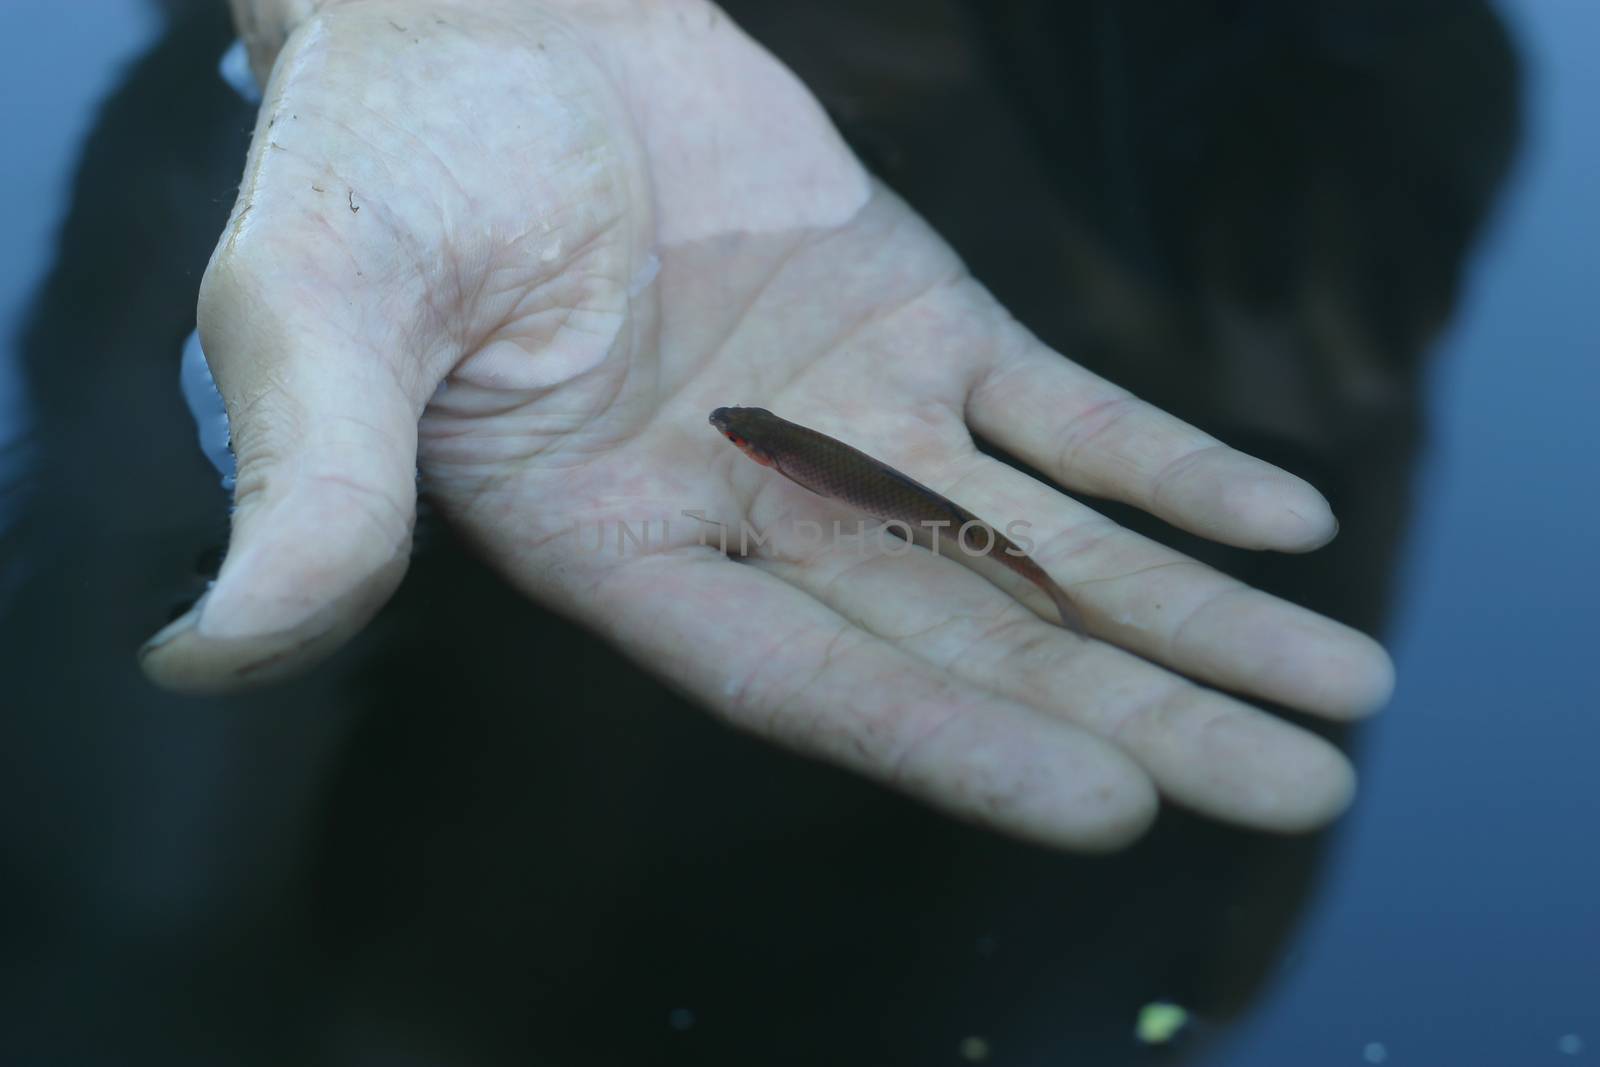 Small fish in a hand underwater fishing concept. A man let a small fish go